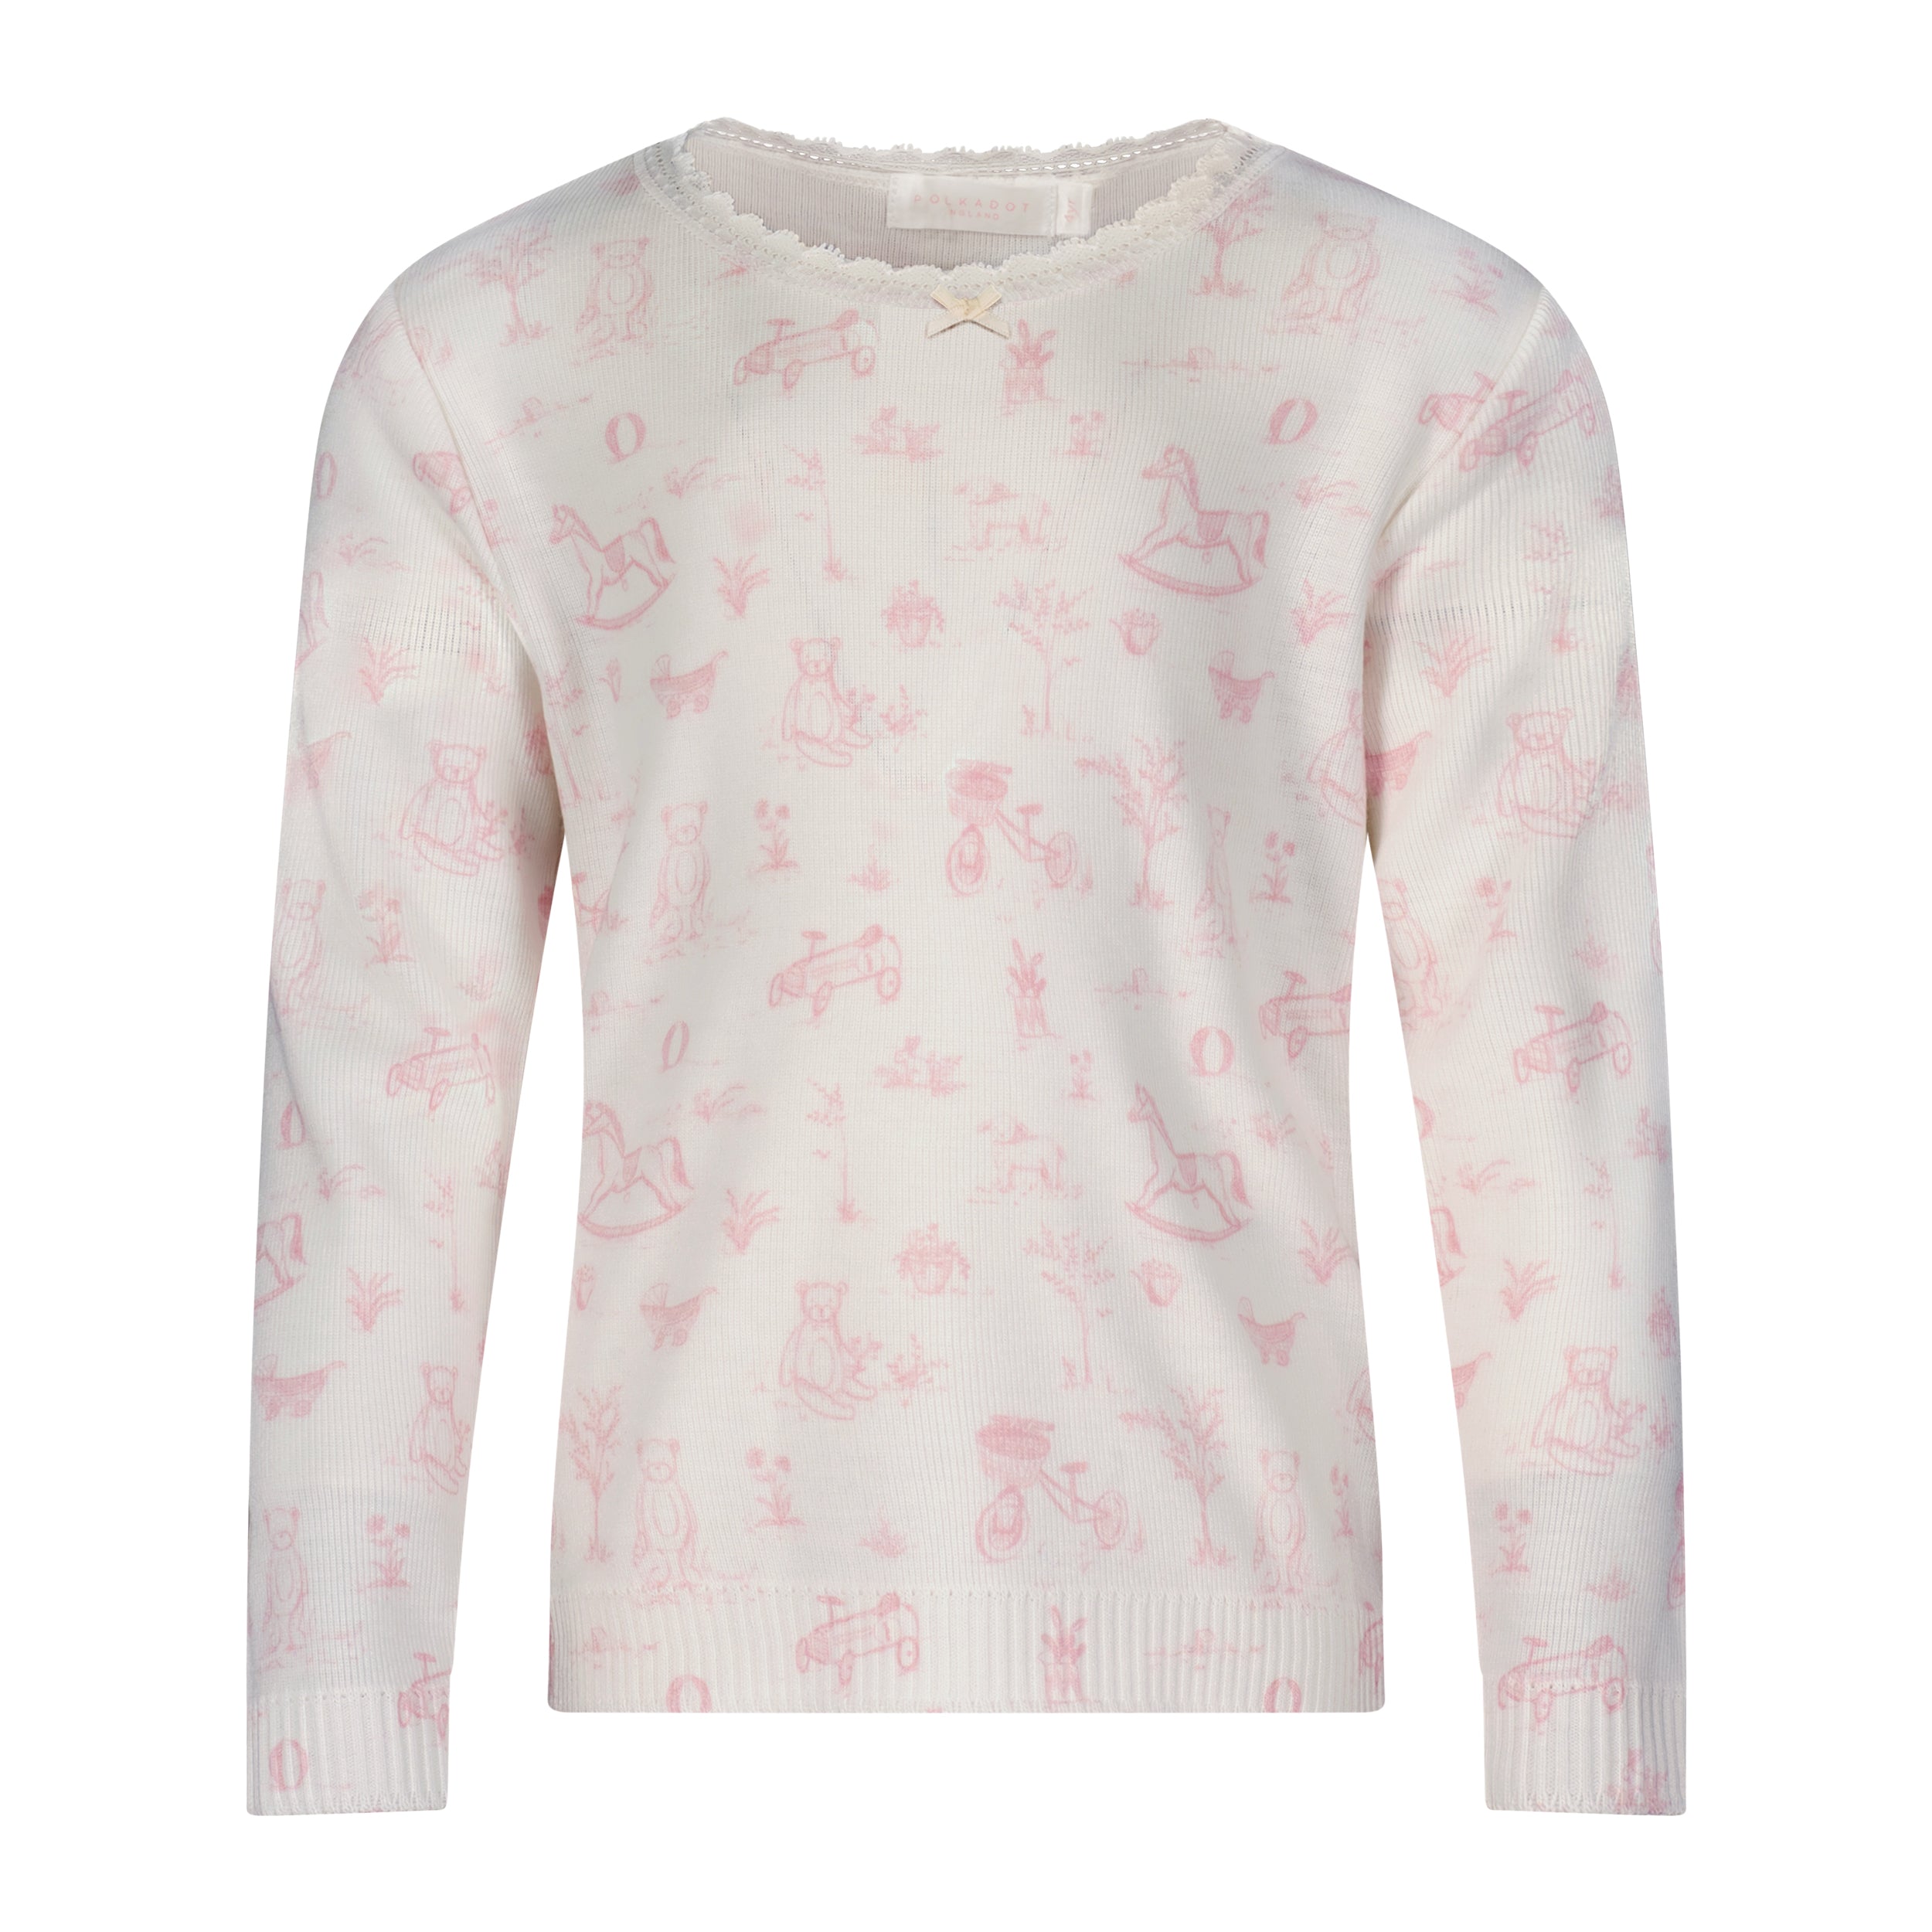 GIRLS PINK TOILE Print CREW LS w Lace